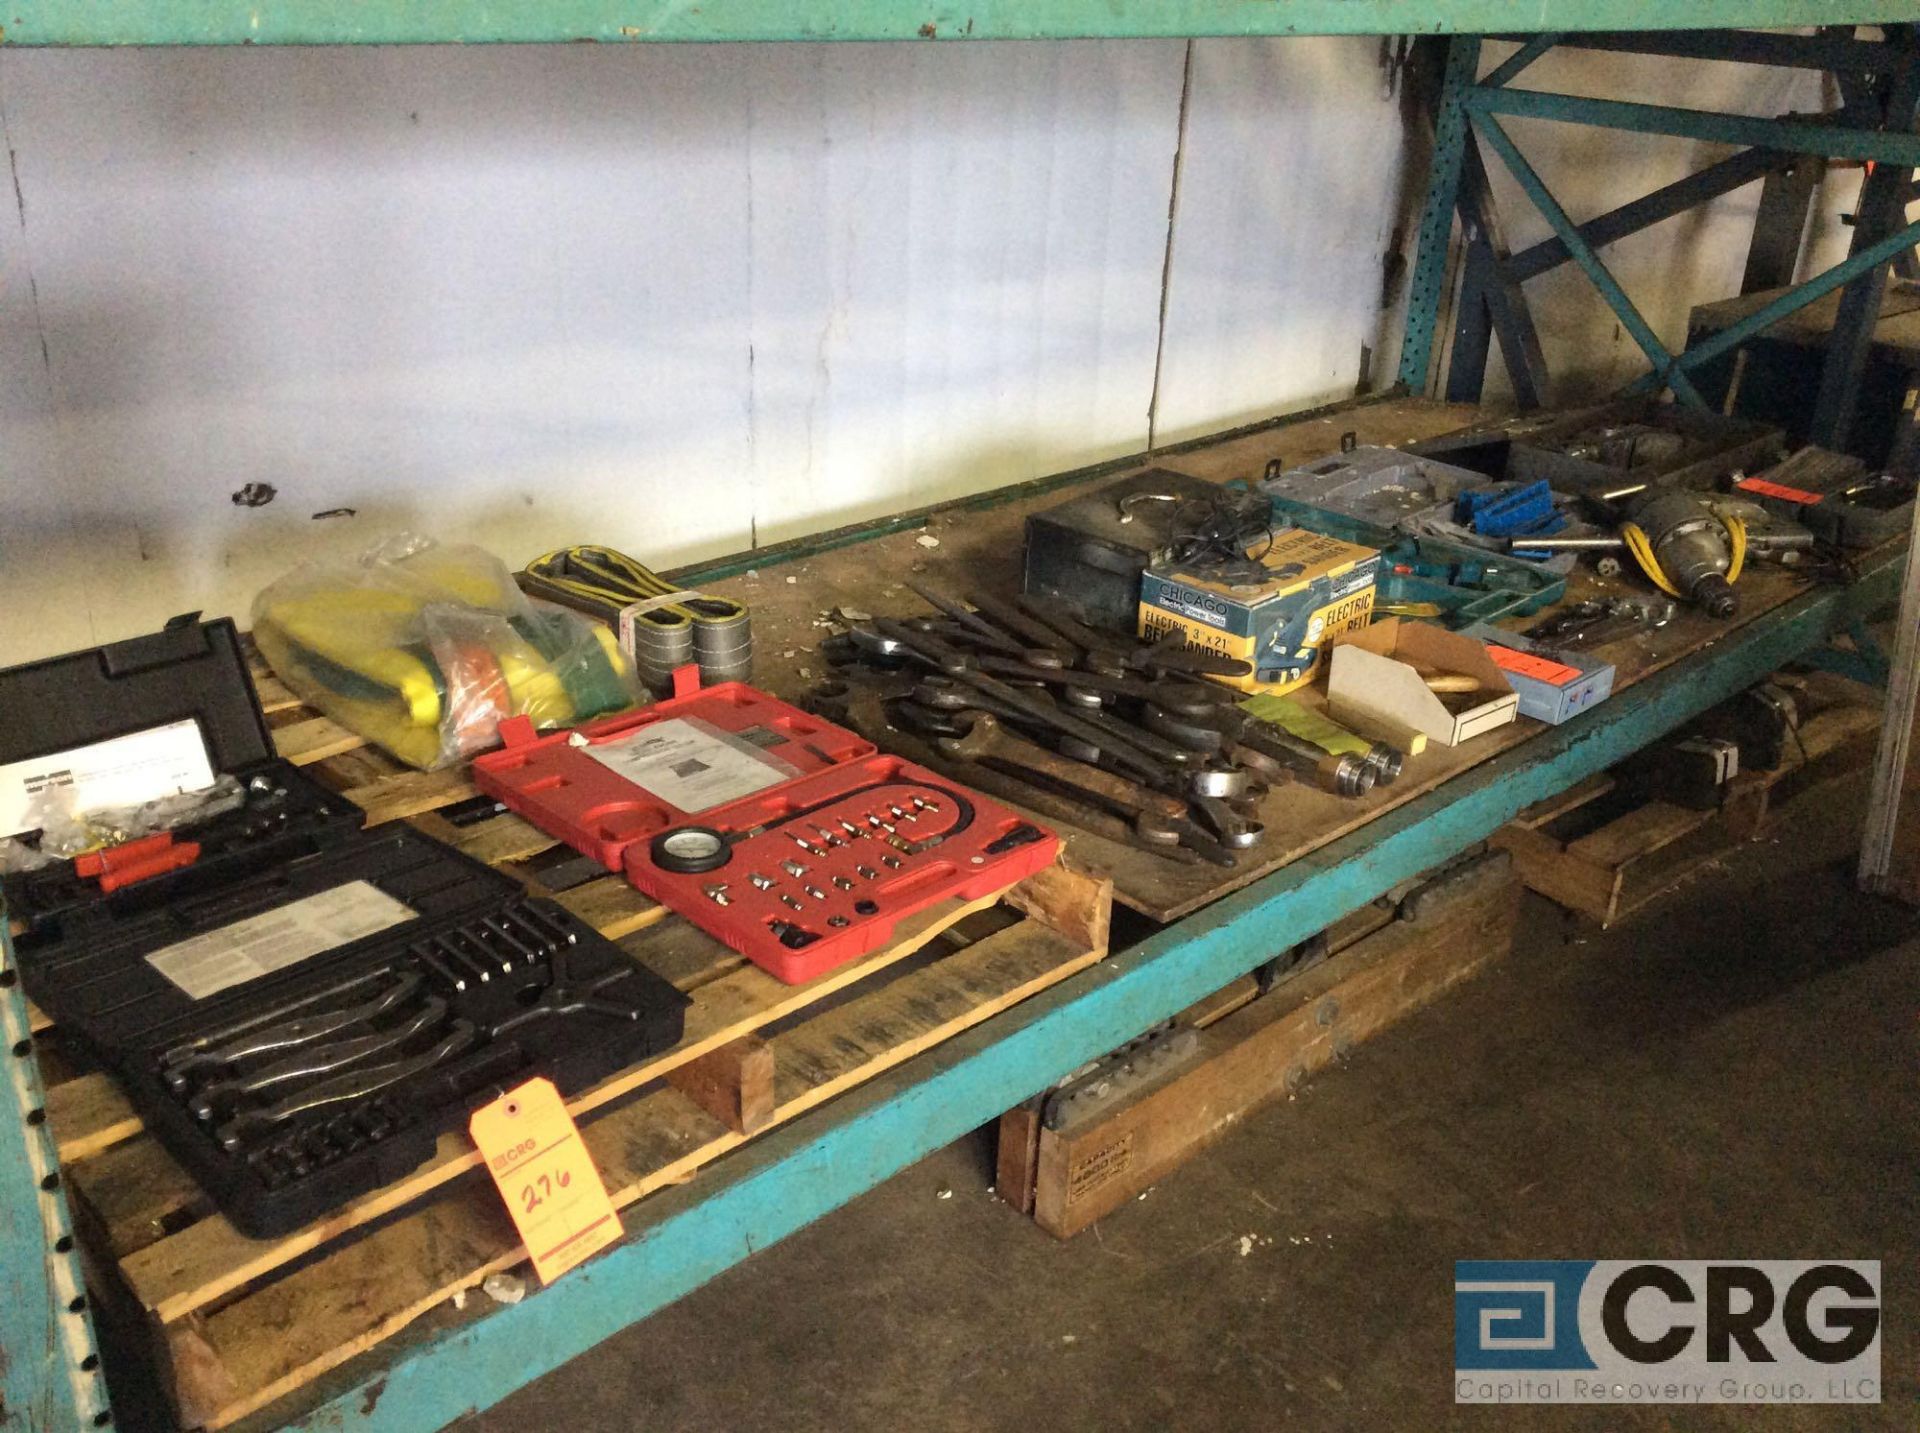 Lot of asst handtools including wrenches, hammer drills, puller set, etc.